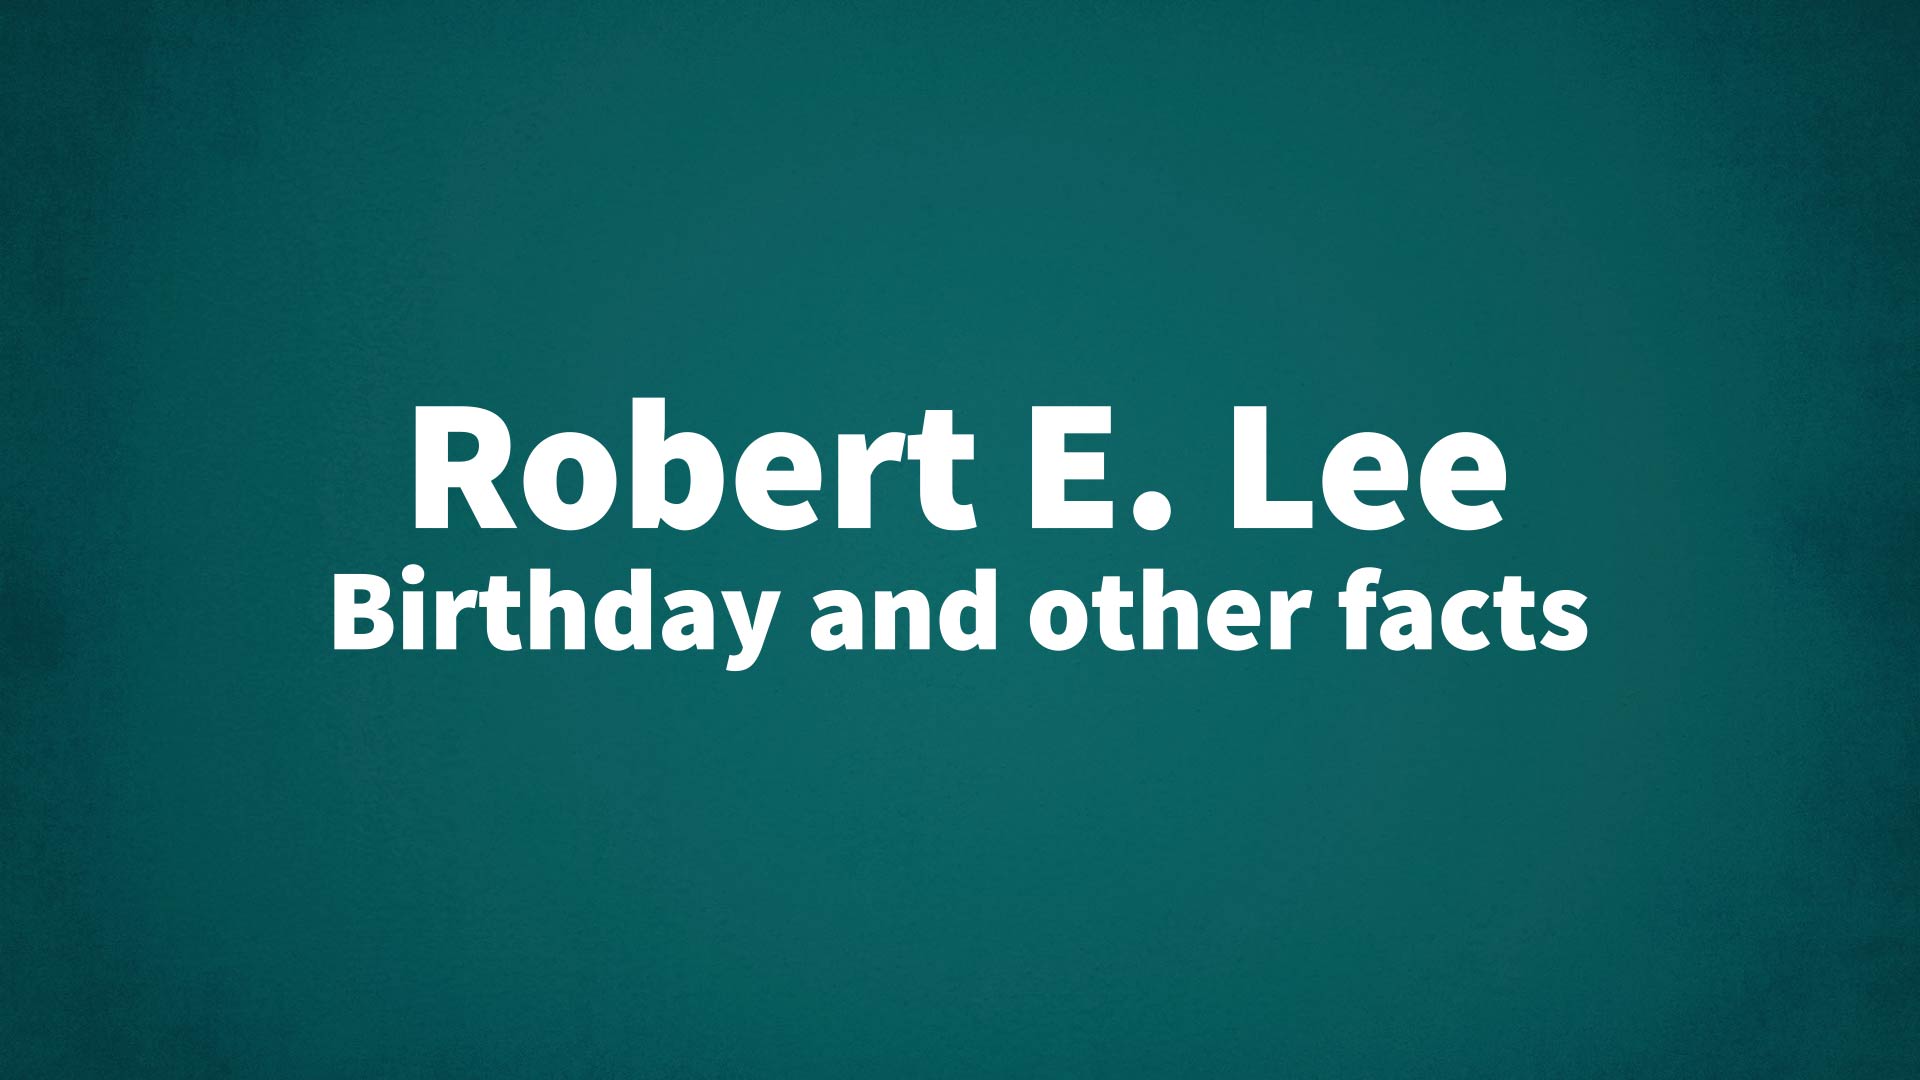 title image for Robert E. Lee birthday